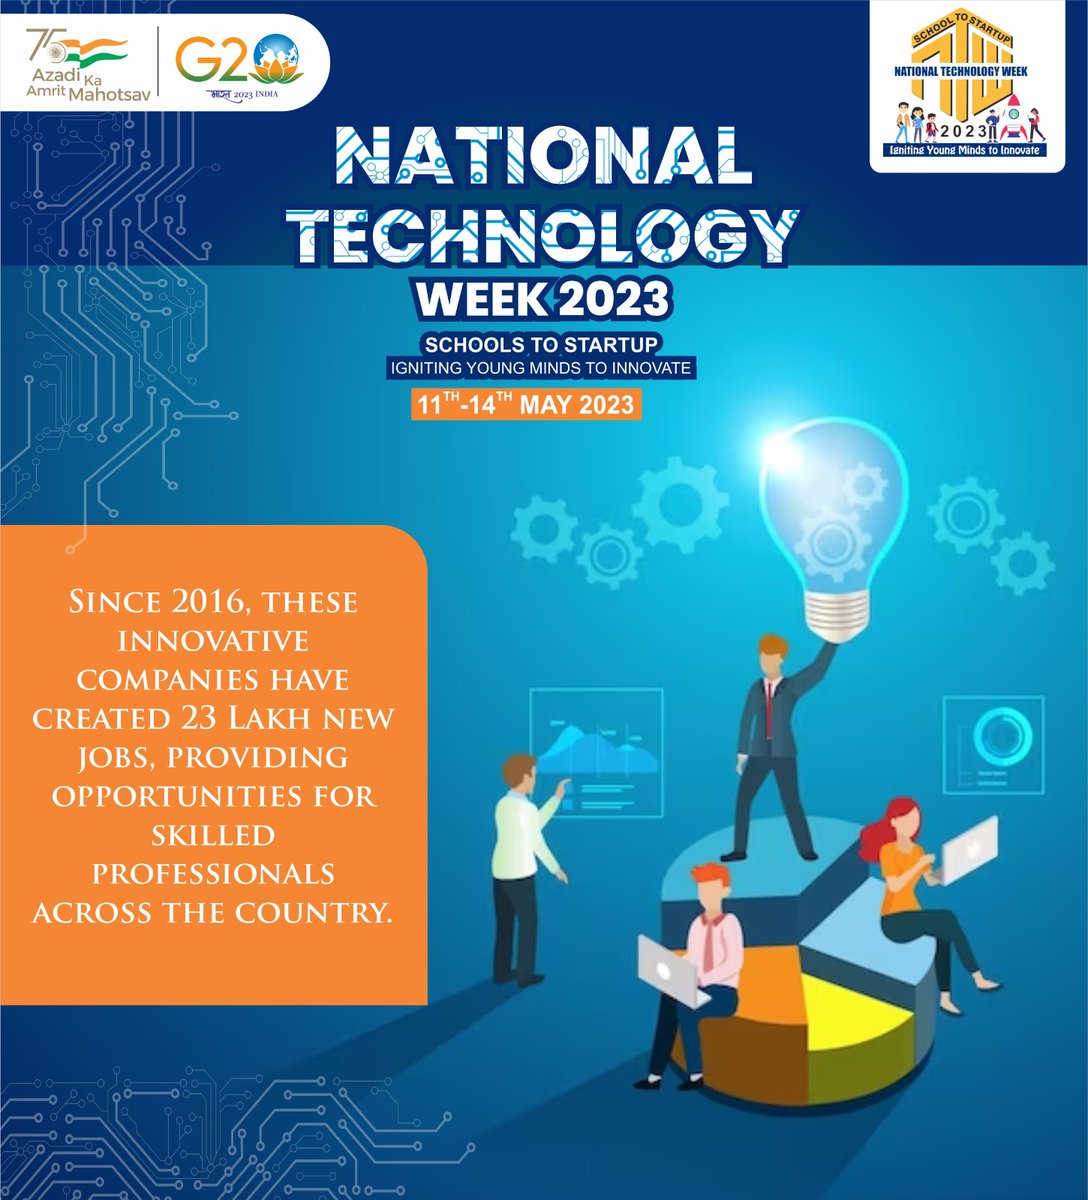 Since 2016, these innovative companies have created 23 Lakh new jobs, providing opportunities for skilled professionals across the country.
#nationaltechnologyweek2023 #InnovativeCompanies #jobcreation 
#newopportunities #SkilledProfessionals #Employmentgrowth
#indiajobs